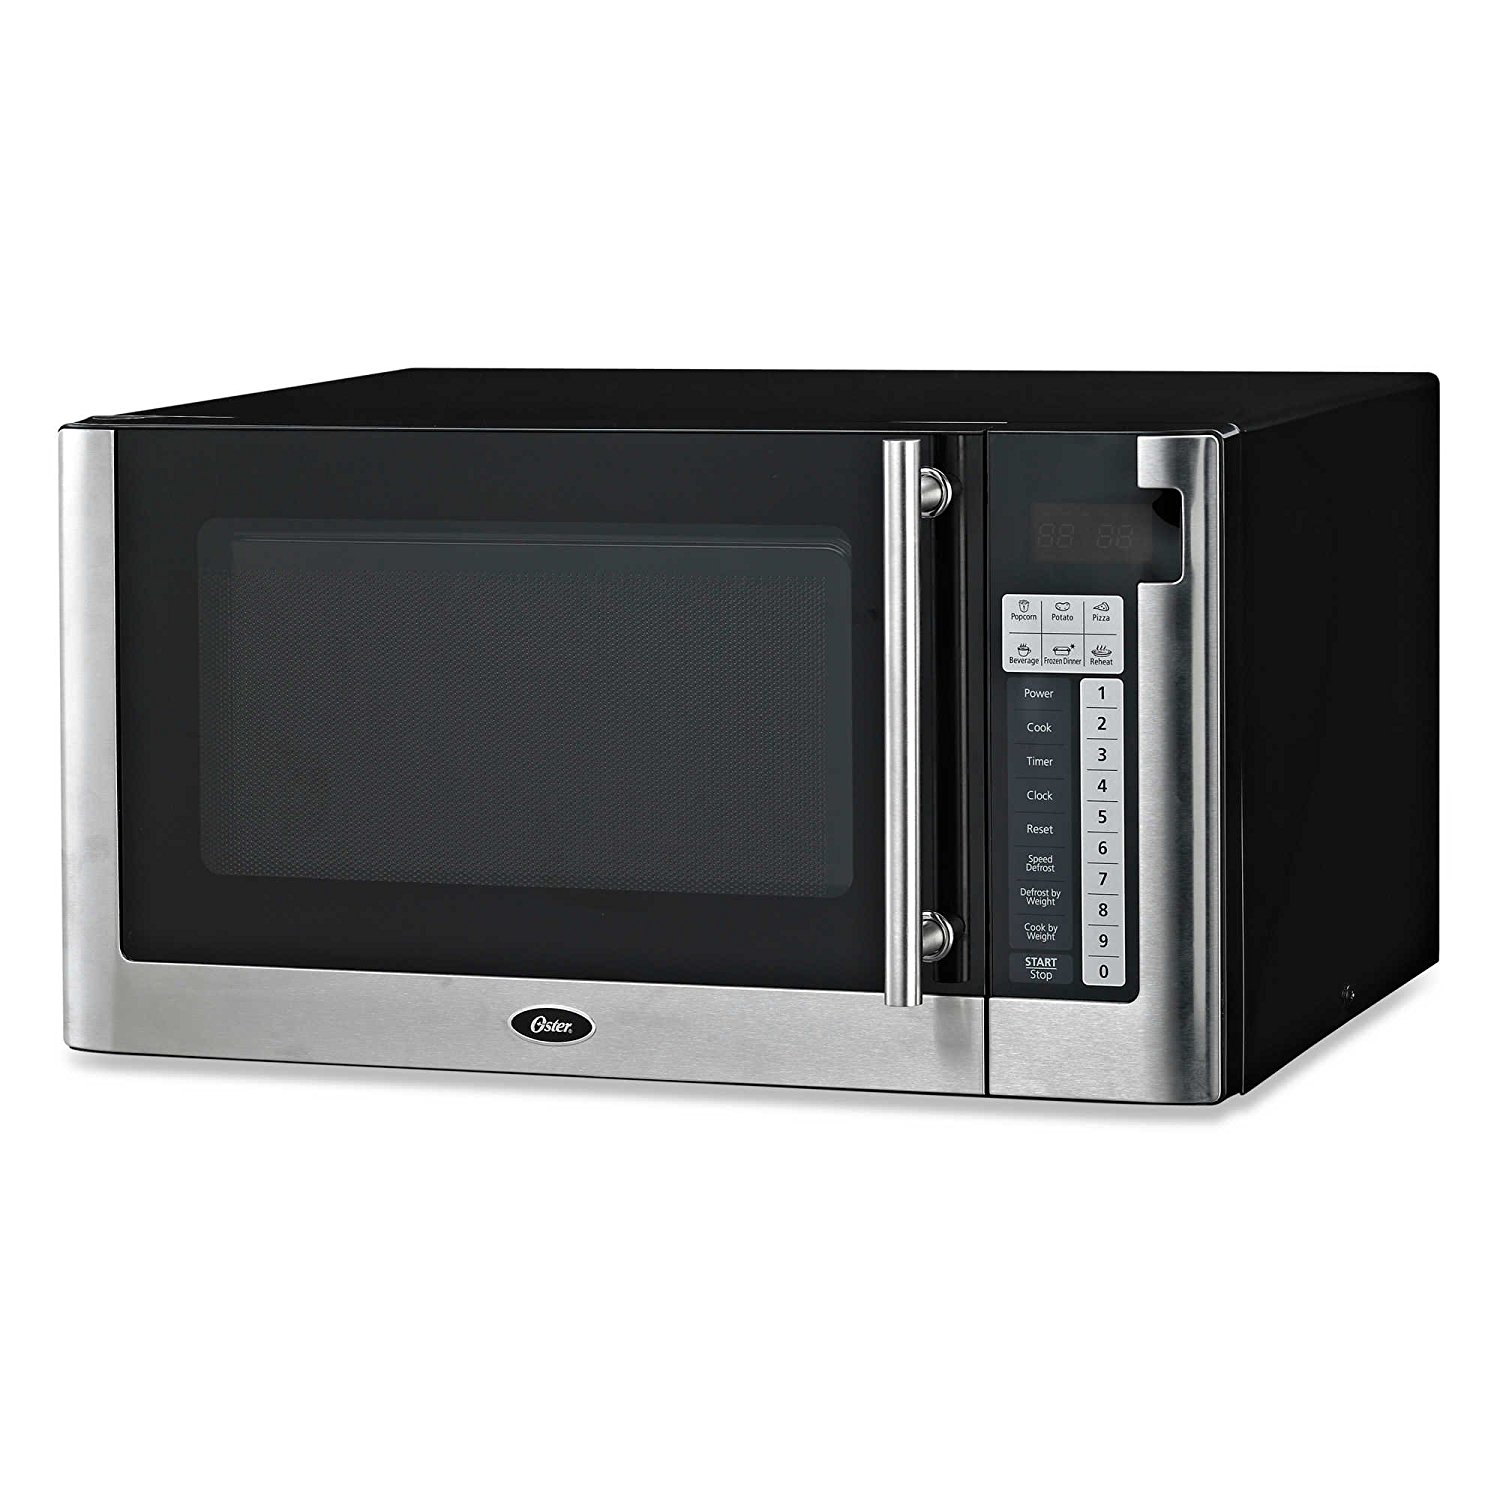 Oster Best and Affordable 1.1-cubic Foot Digital Microwave Oven in